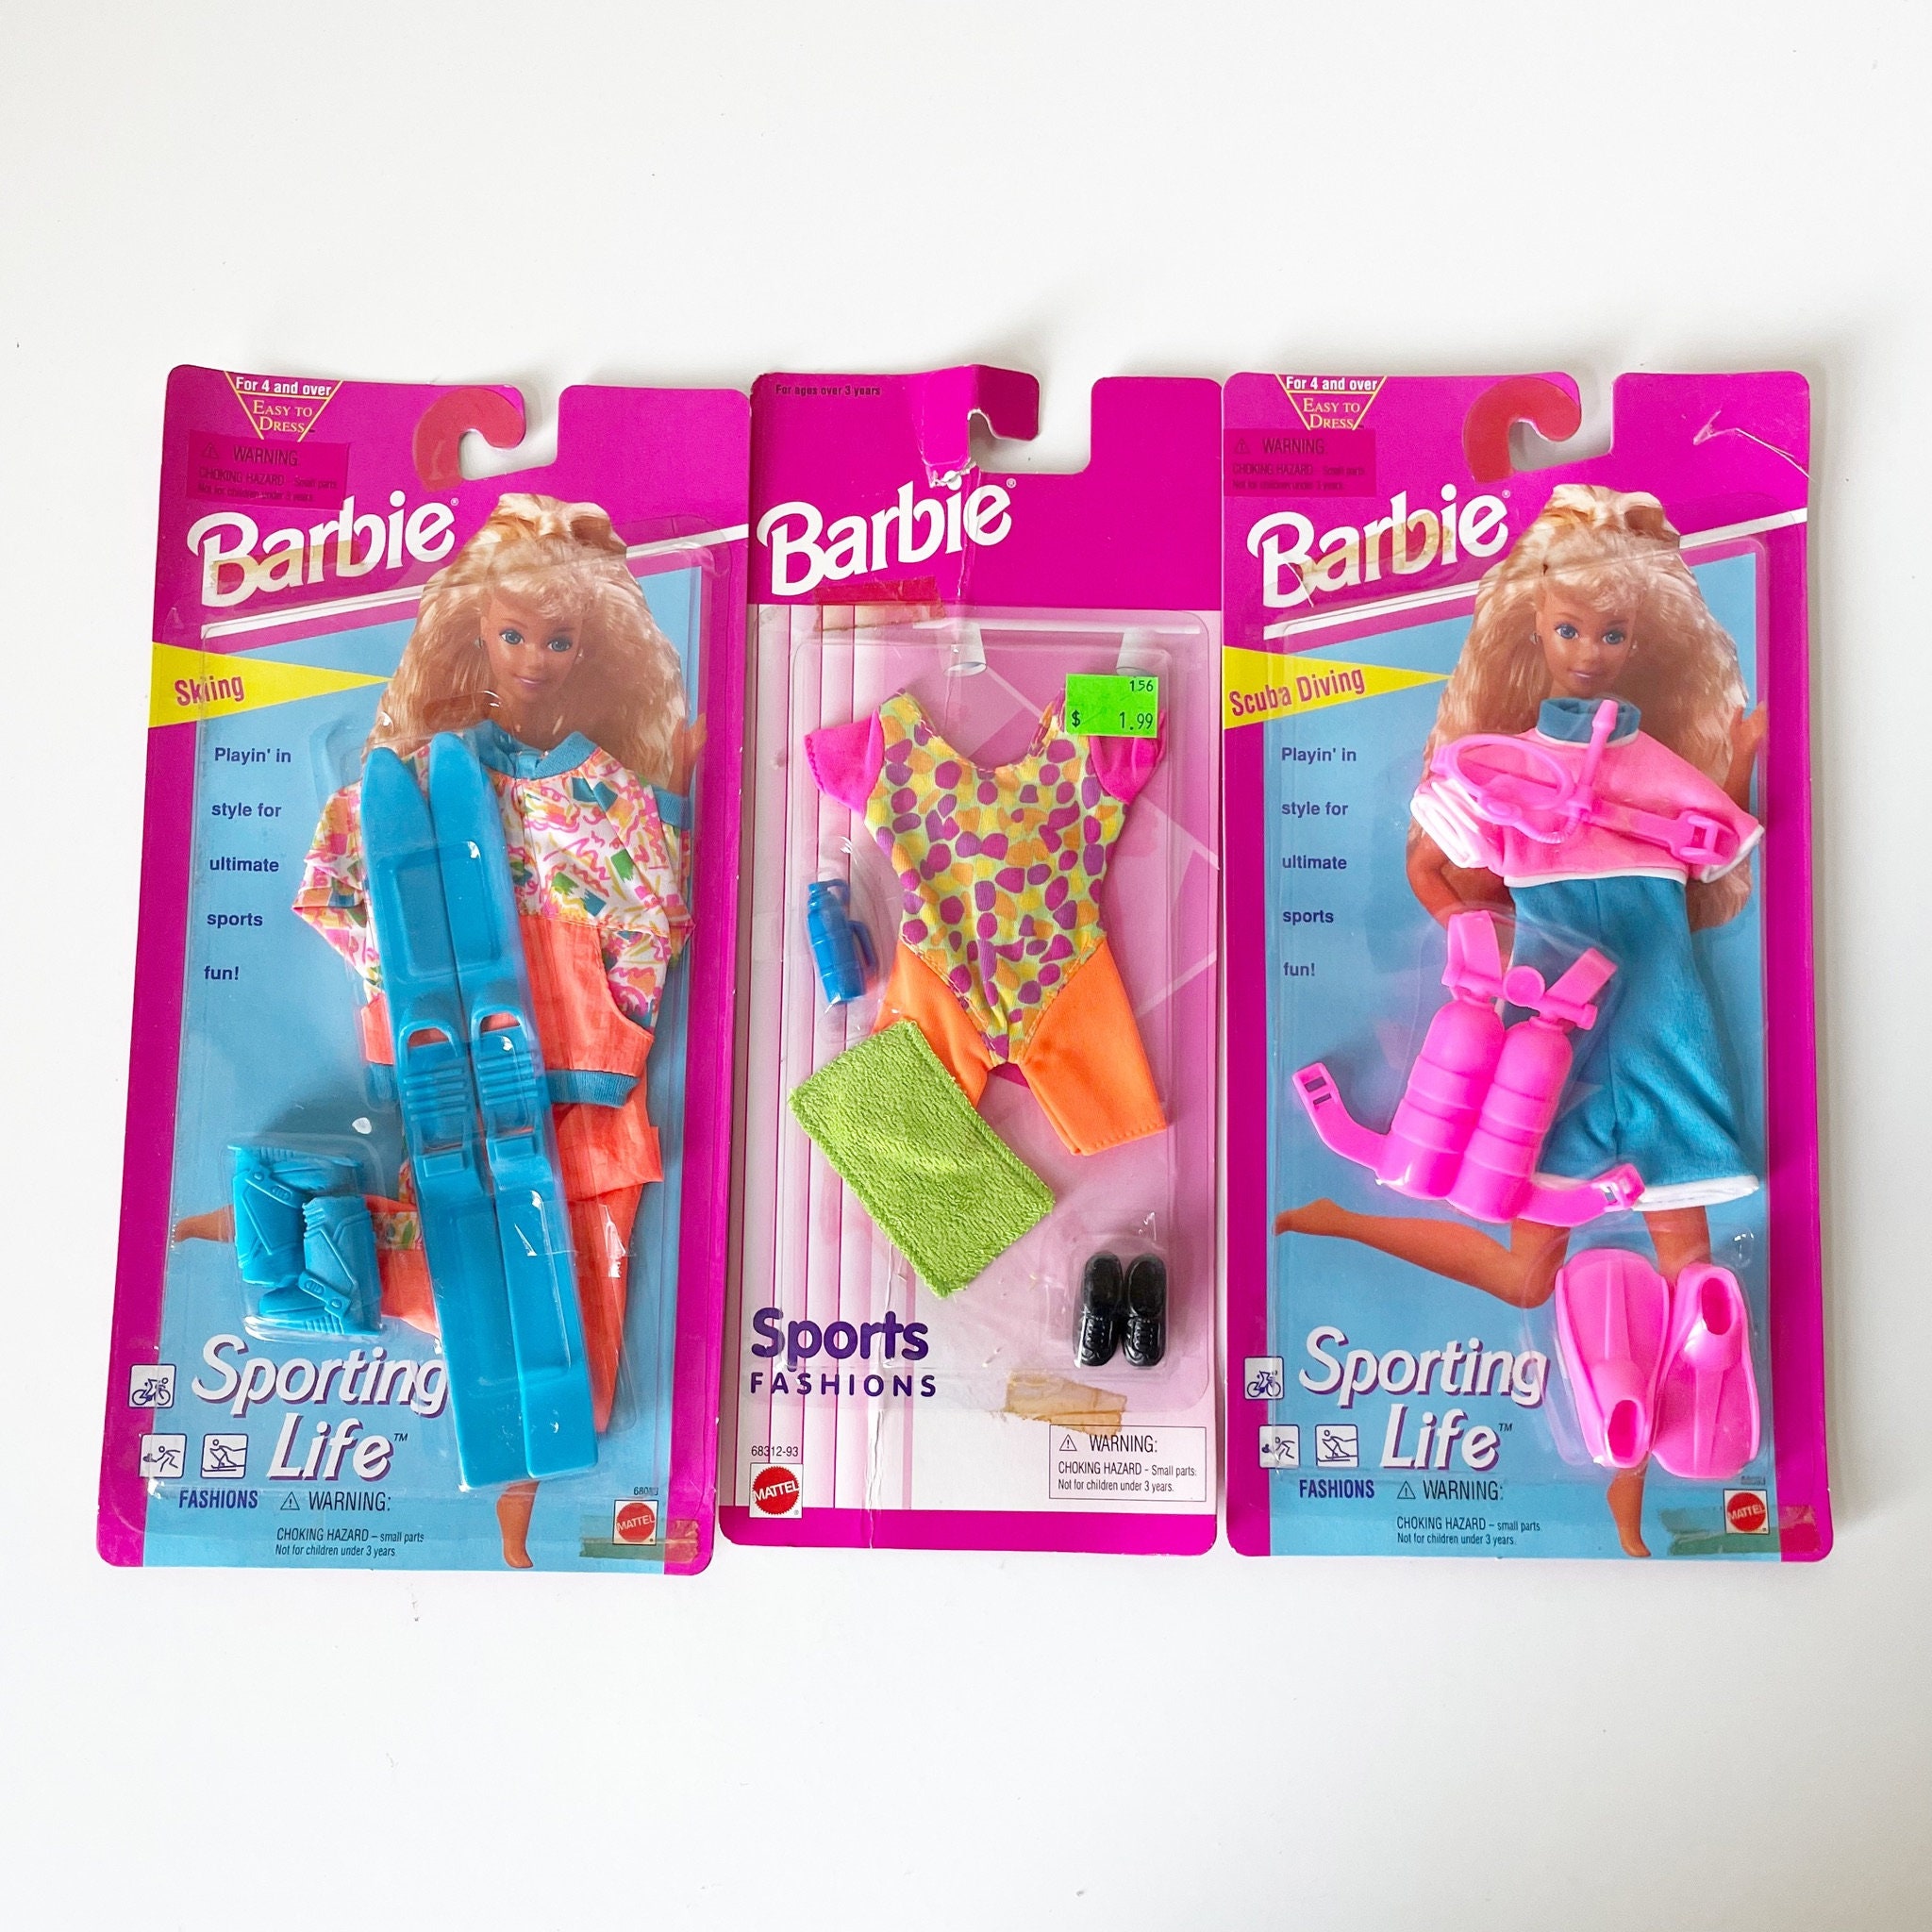 BARBIE CLOTHES and ACCESSORIES VINTAGE 1990s for Sale in Davis, CA - OfferUp